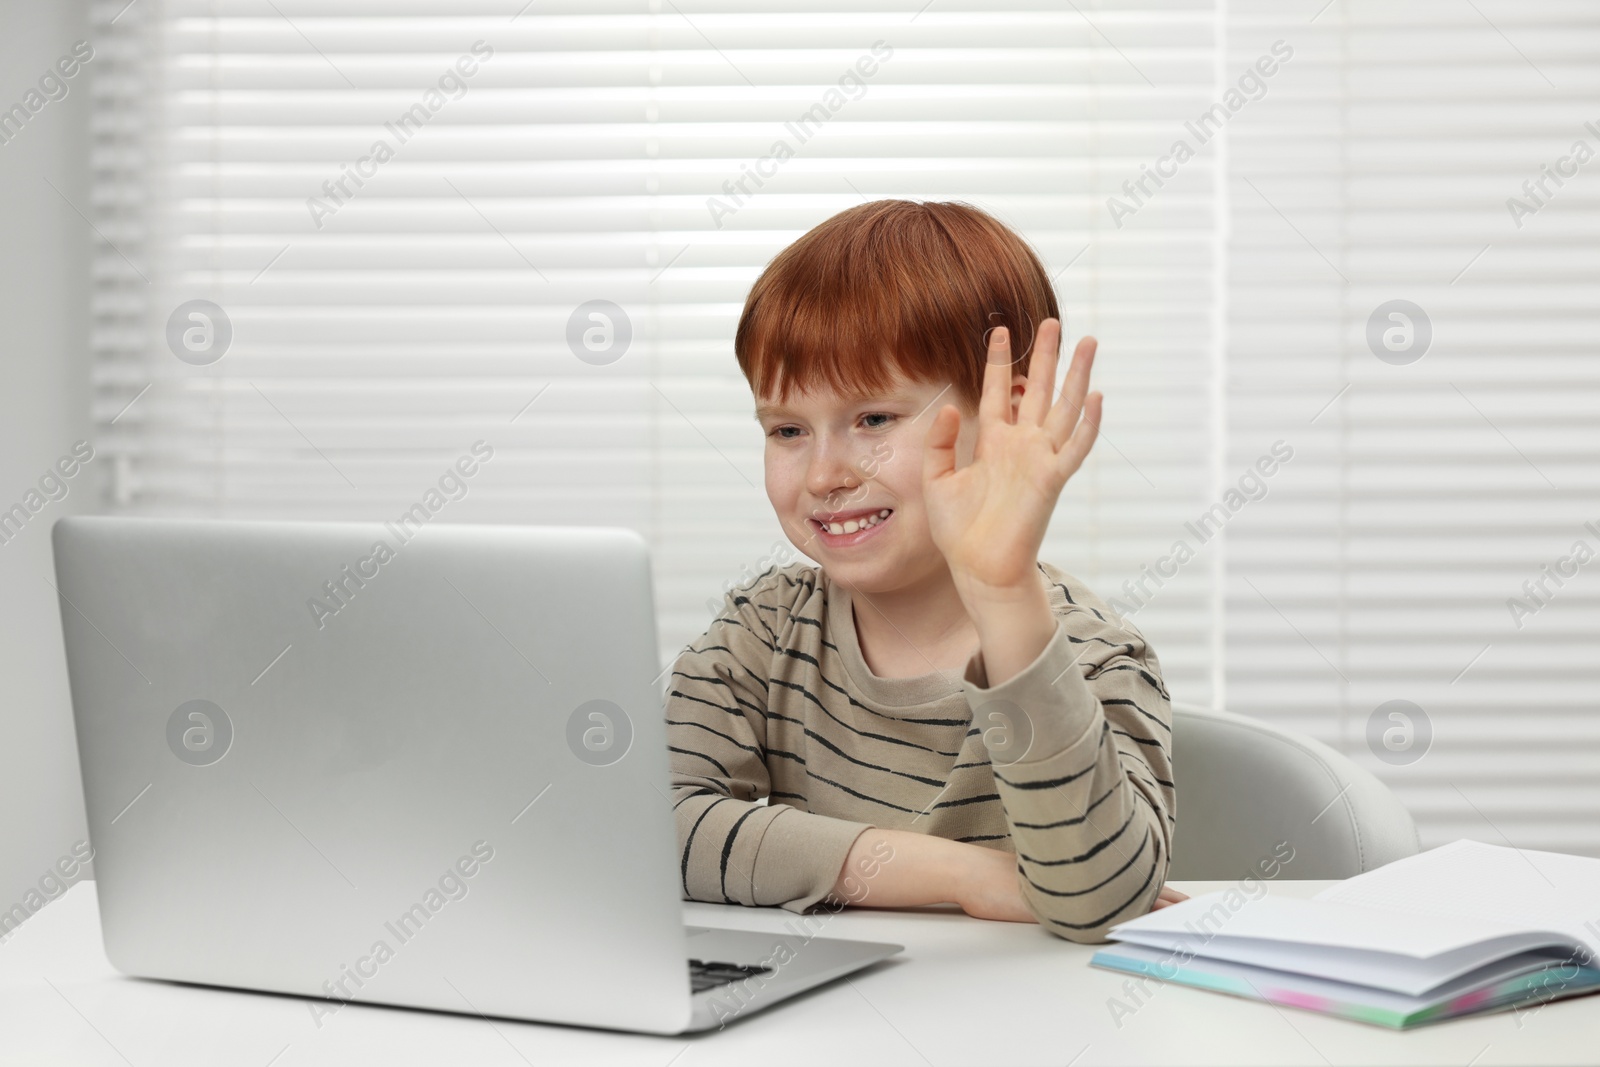 Photo of Cute boy waving hello during online lesson via laptop at white table indoors